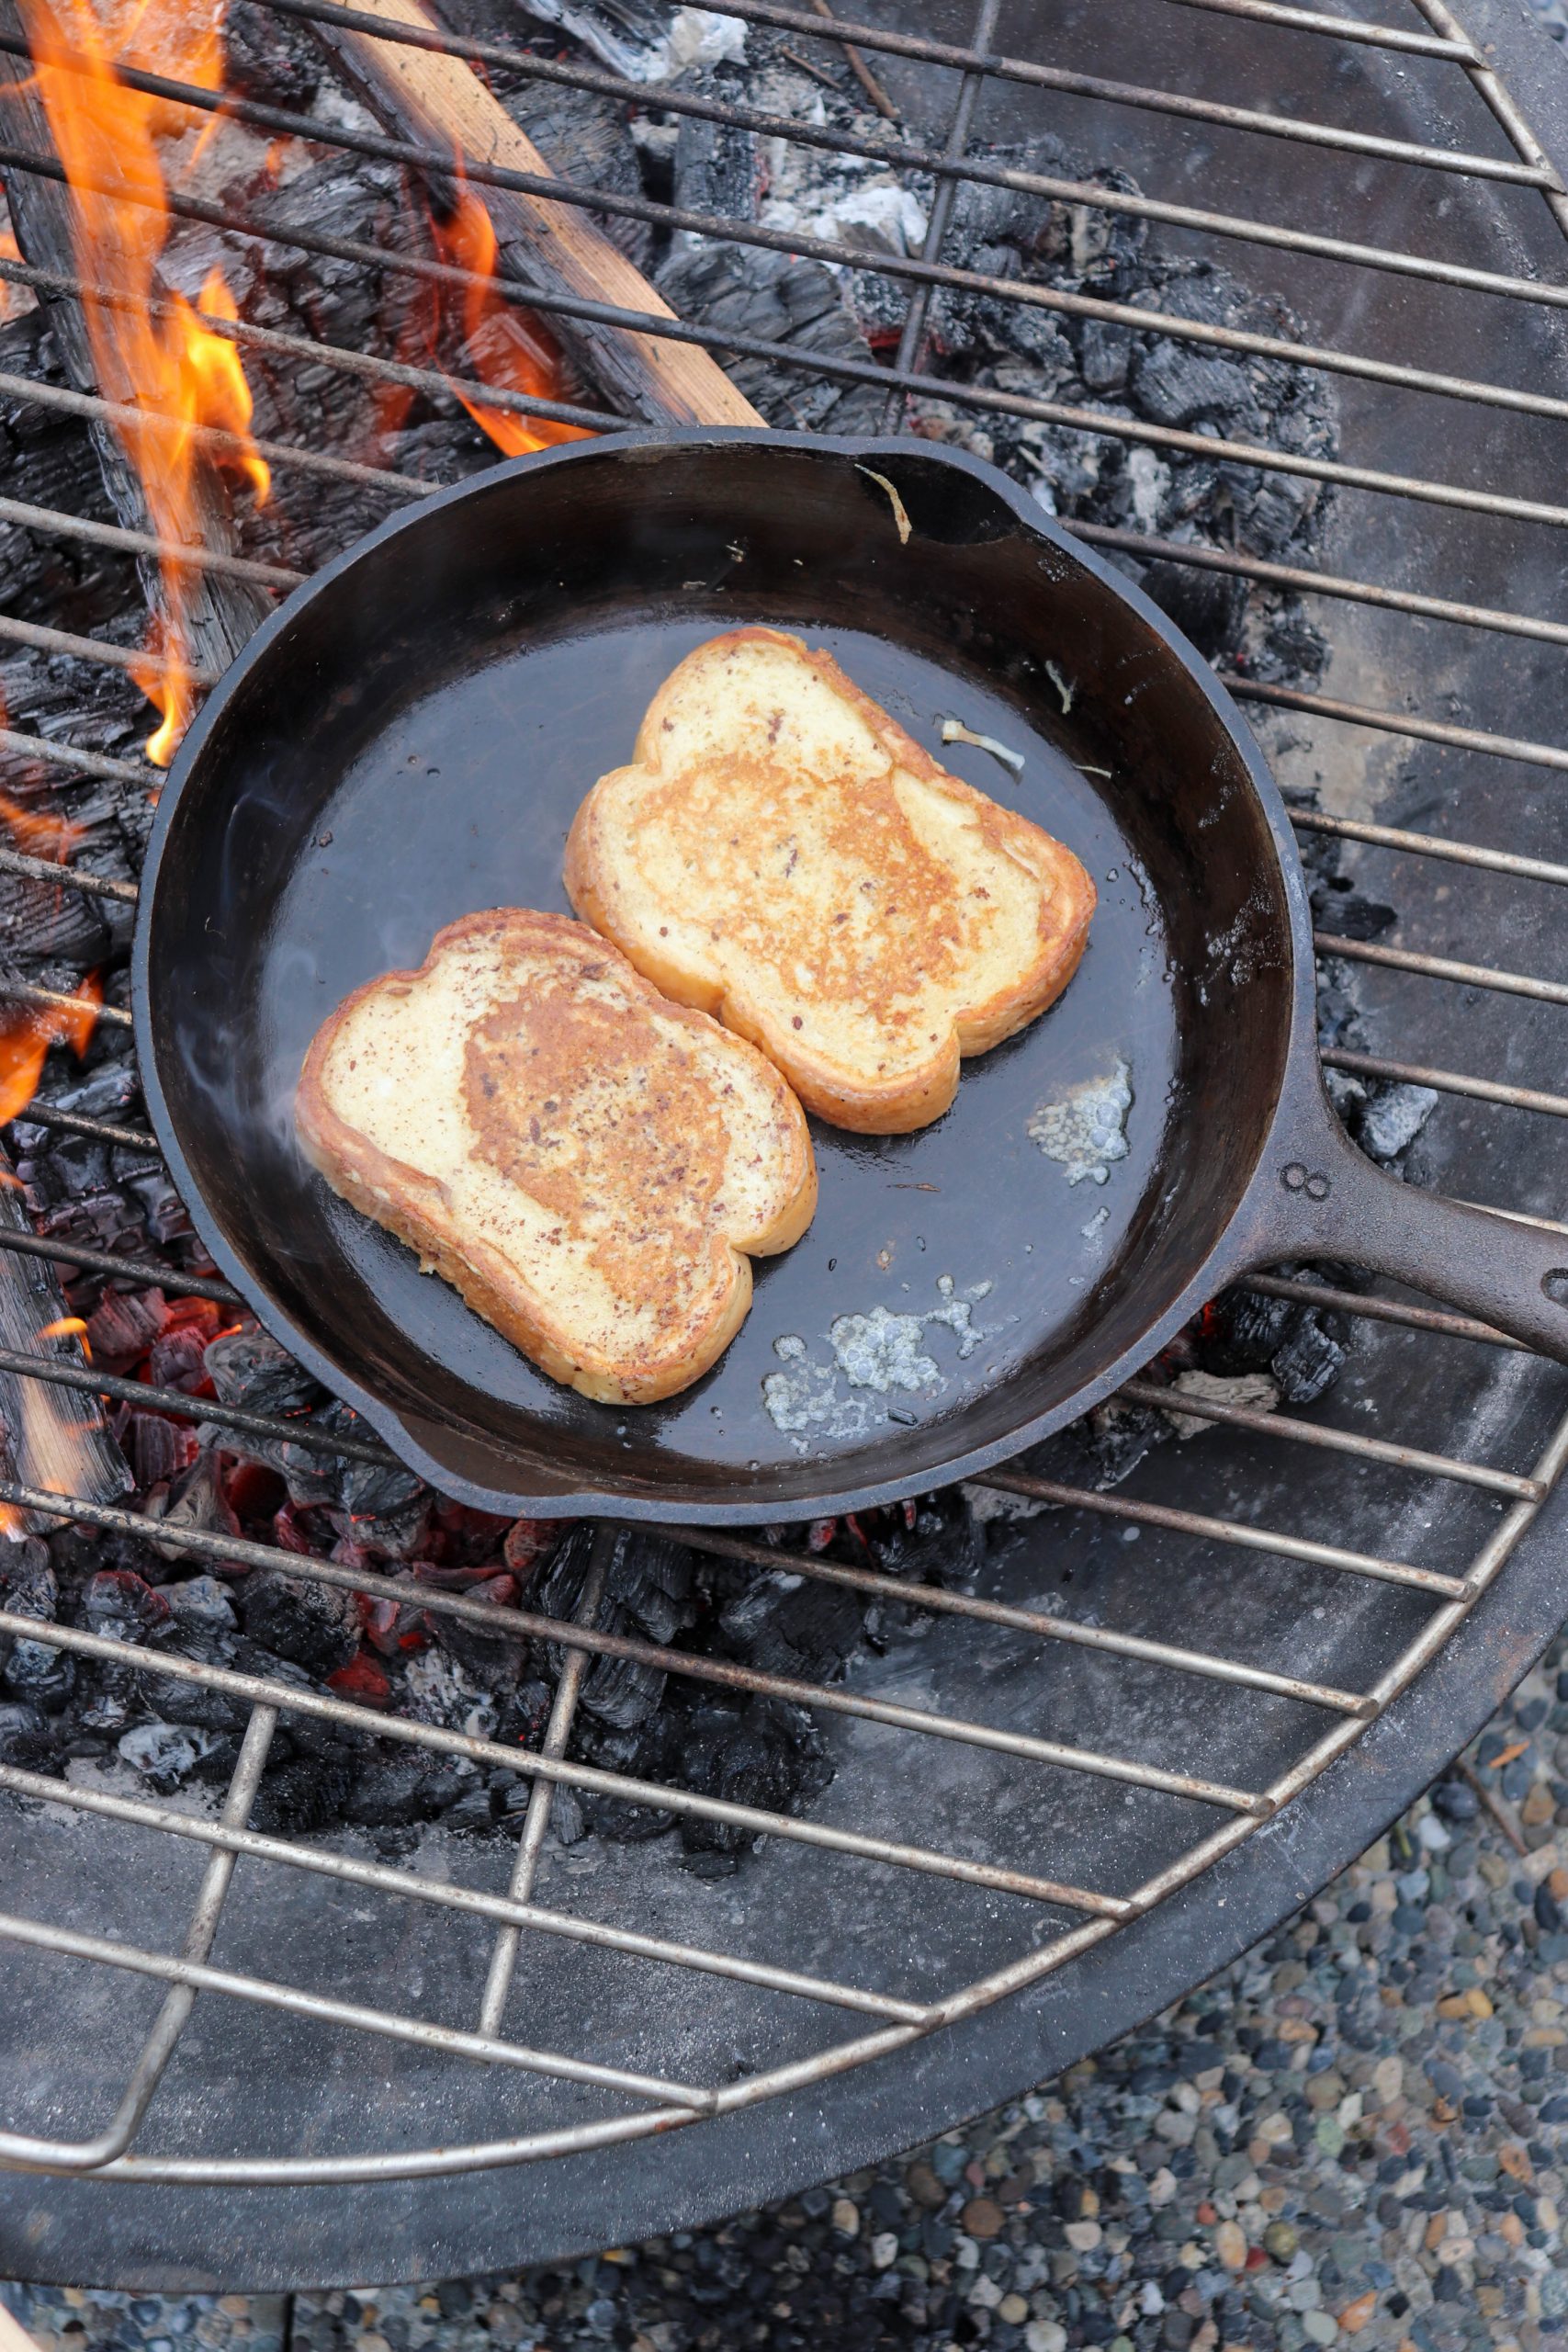 https://campfirefoodie.com/wp-content/uploads/2021/03/Skillet-French-Toast-Recipe-6-scaled.jpg